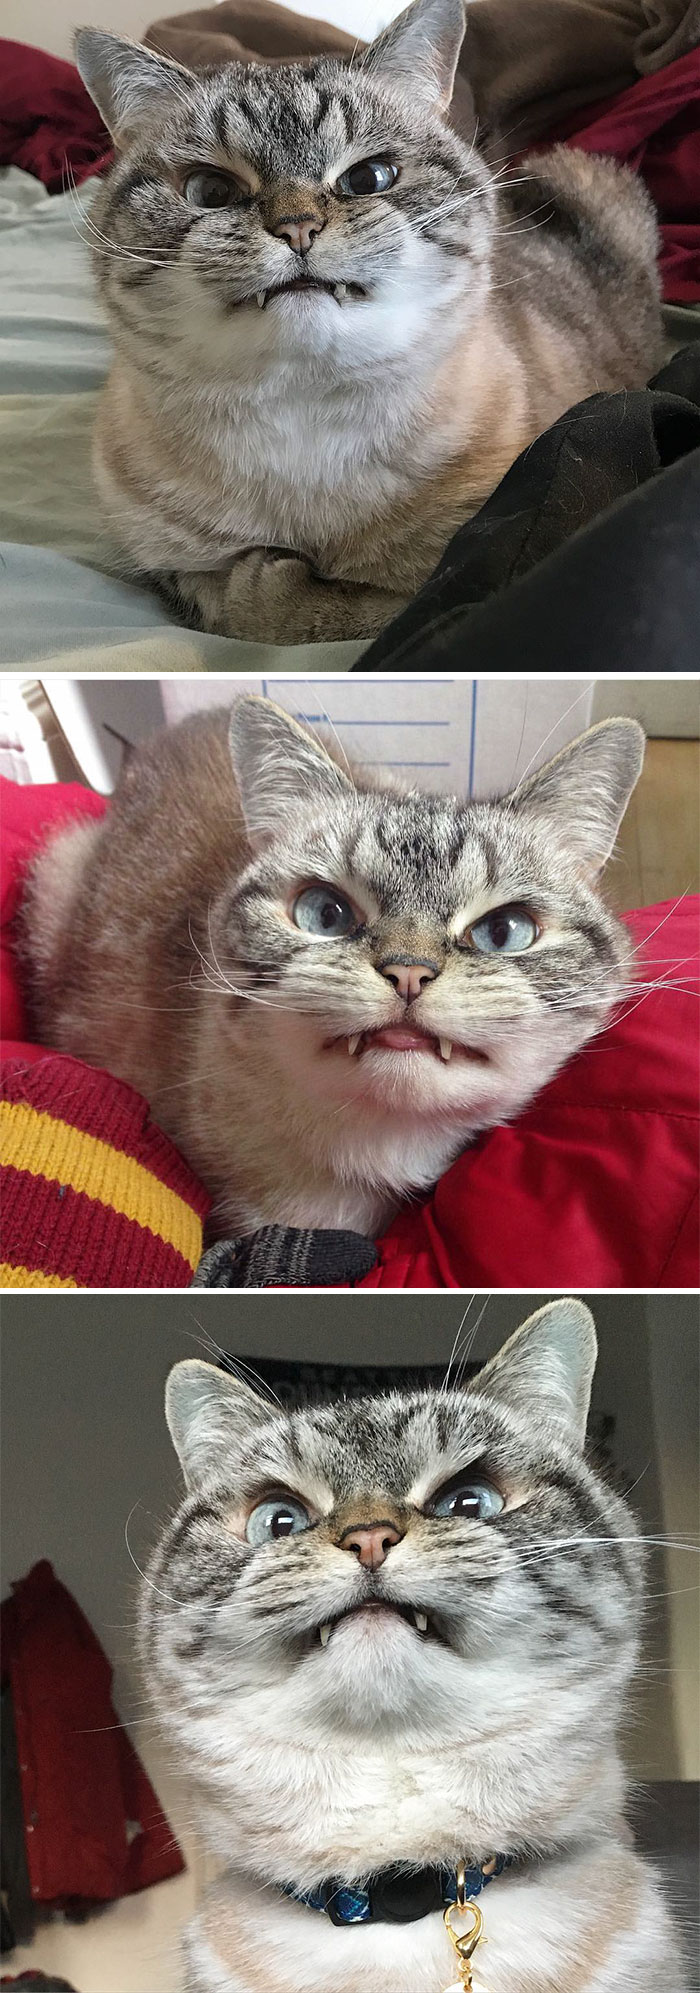 36 Of The Word's Angriest Cats Ever Who Have Had Enough Of Your BS